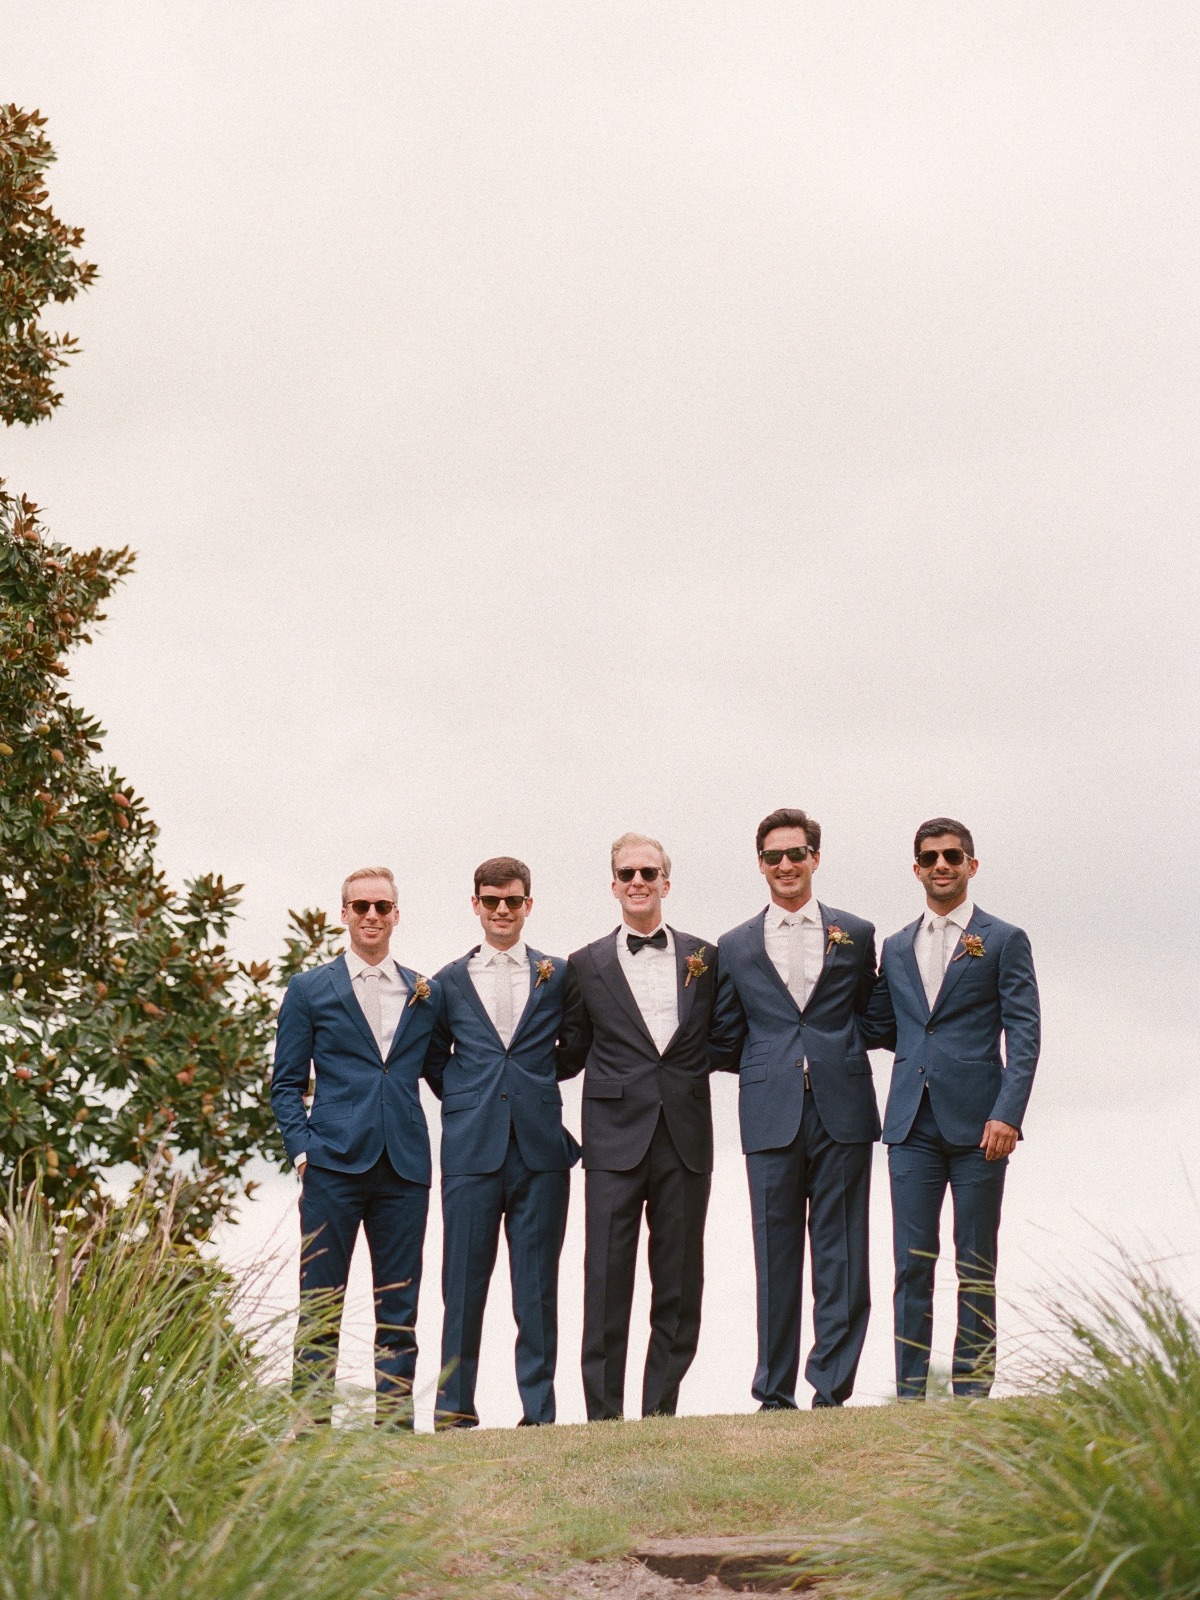 Portrait of groom and groomsmen on top of hill